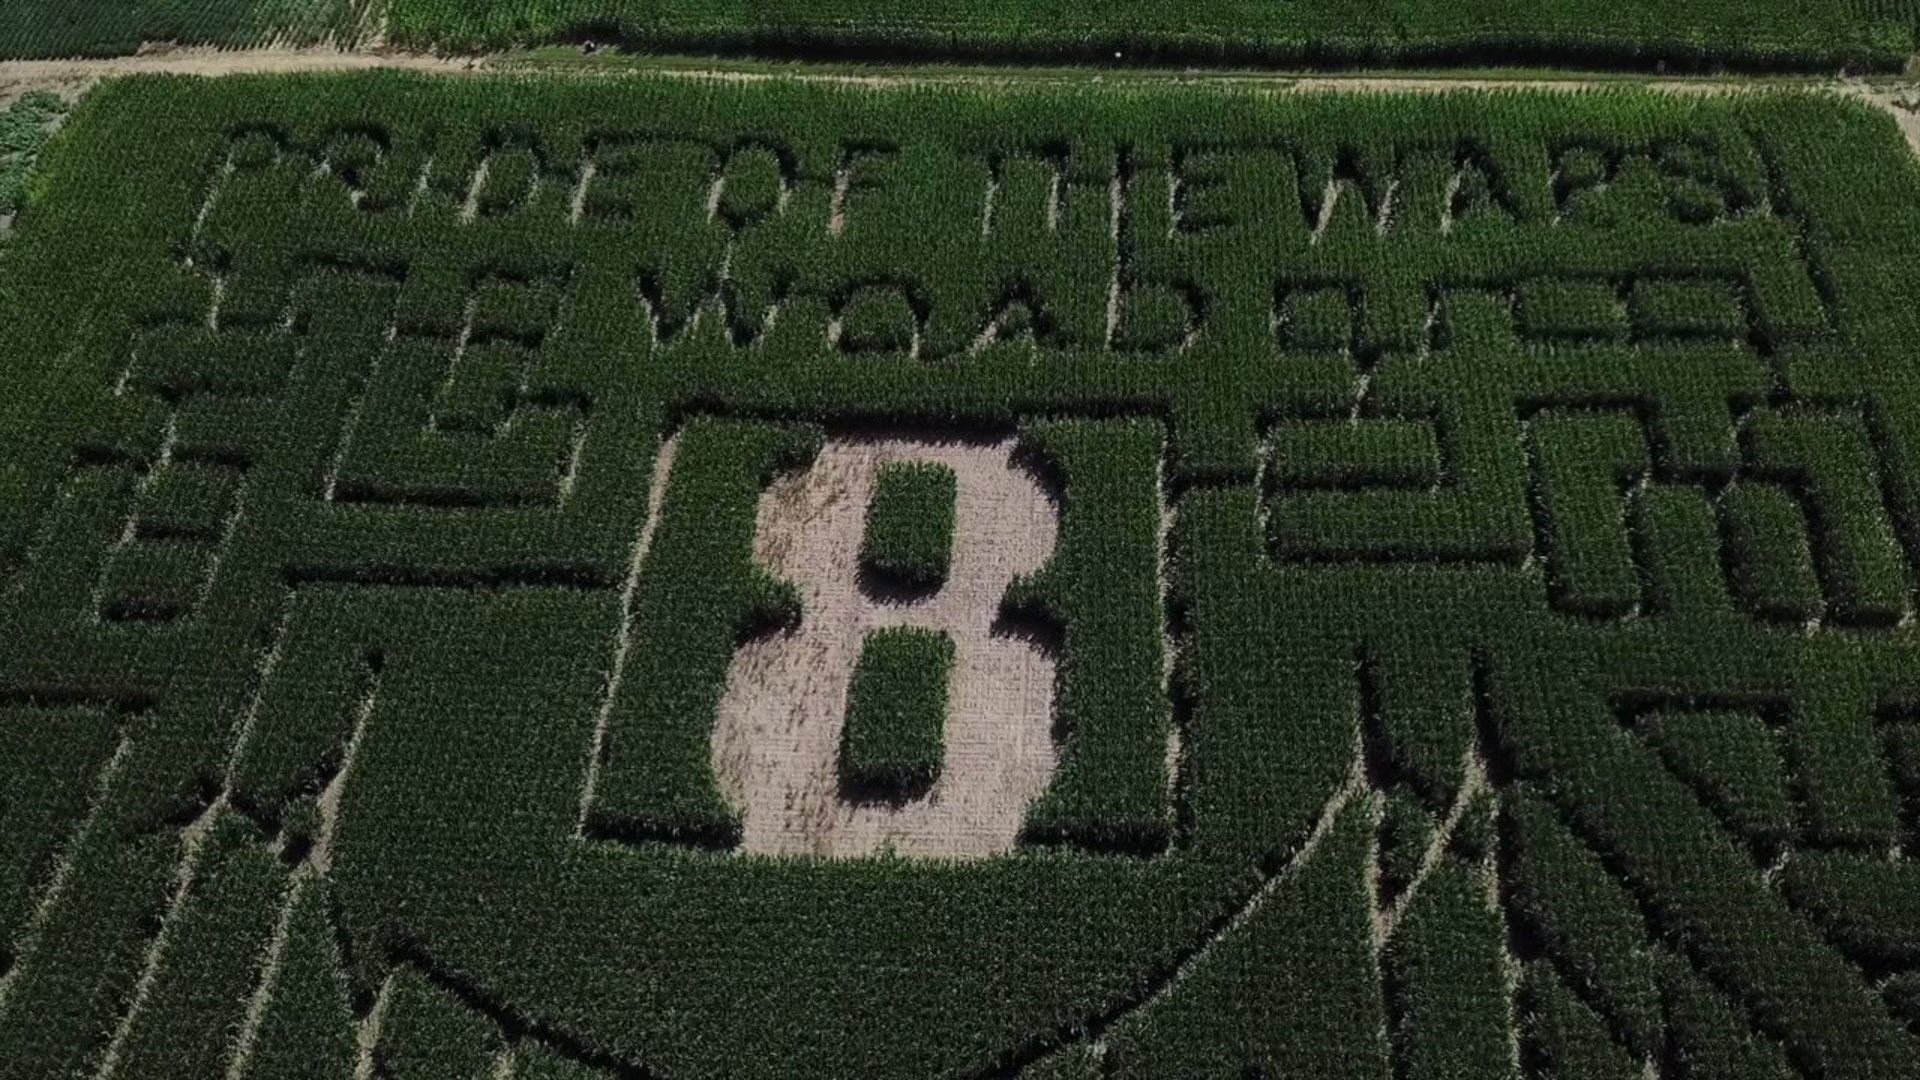 How the Wapsi corn maze is shaping up